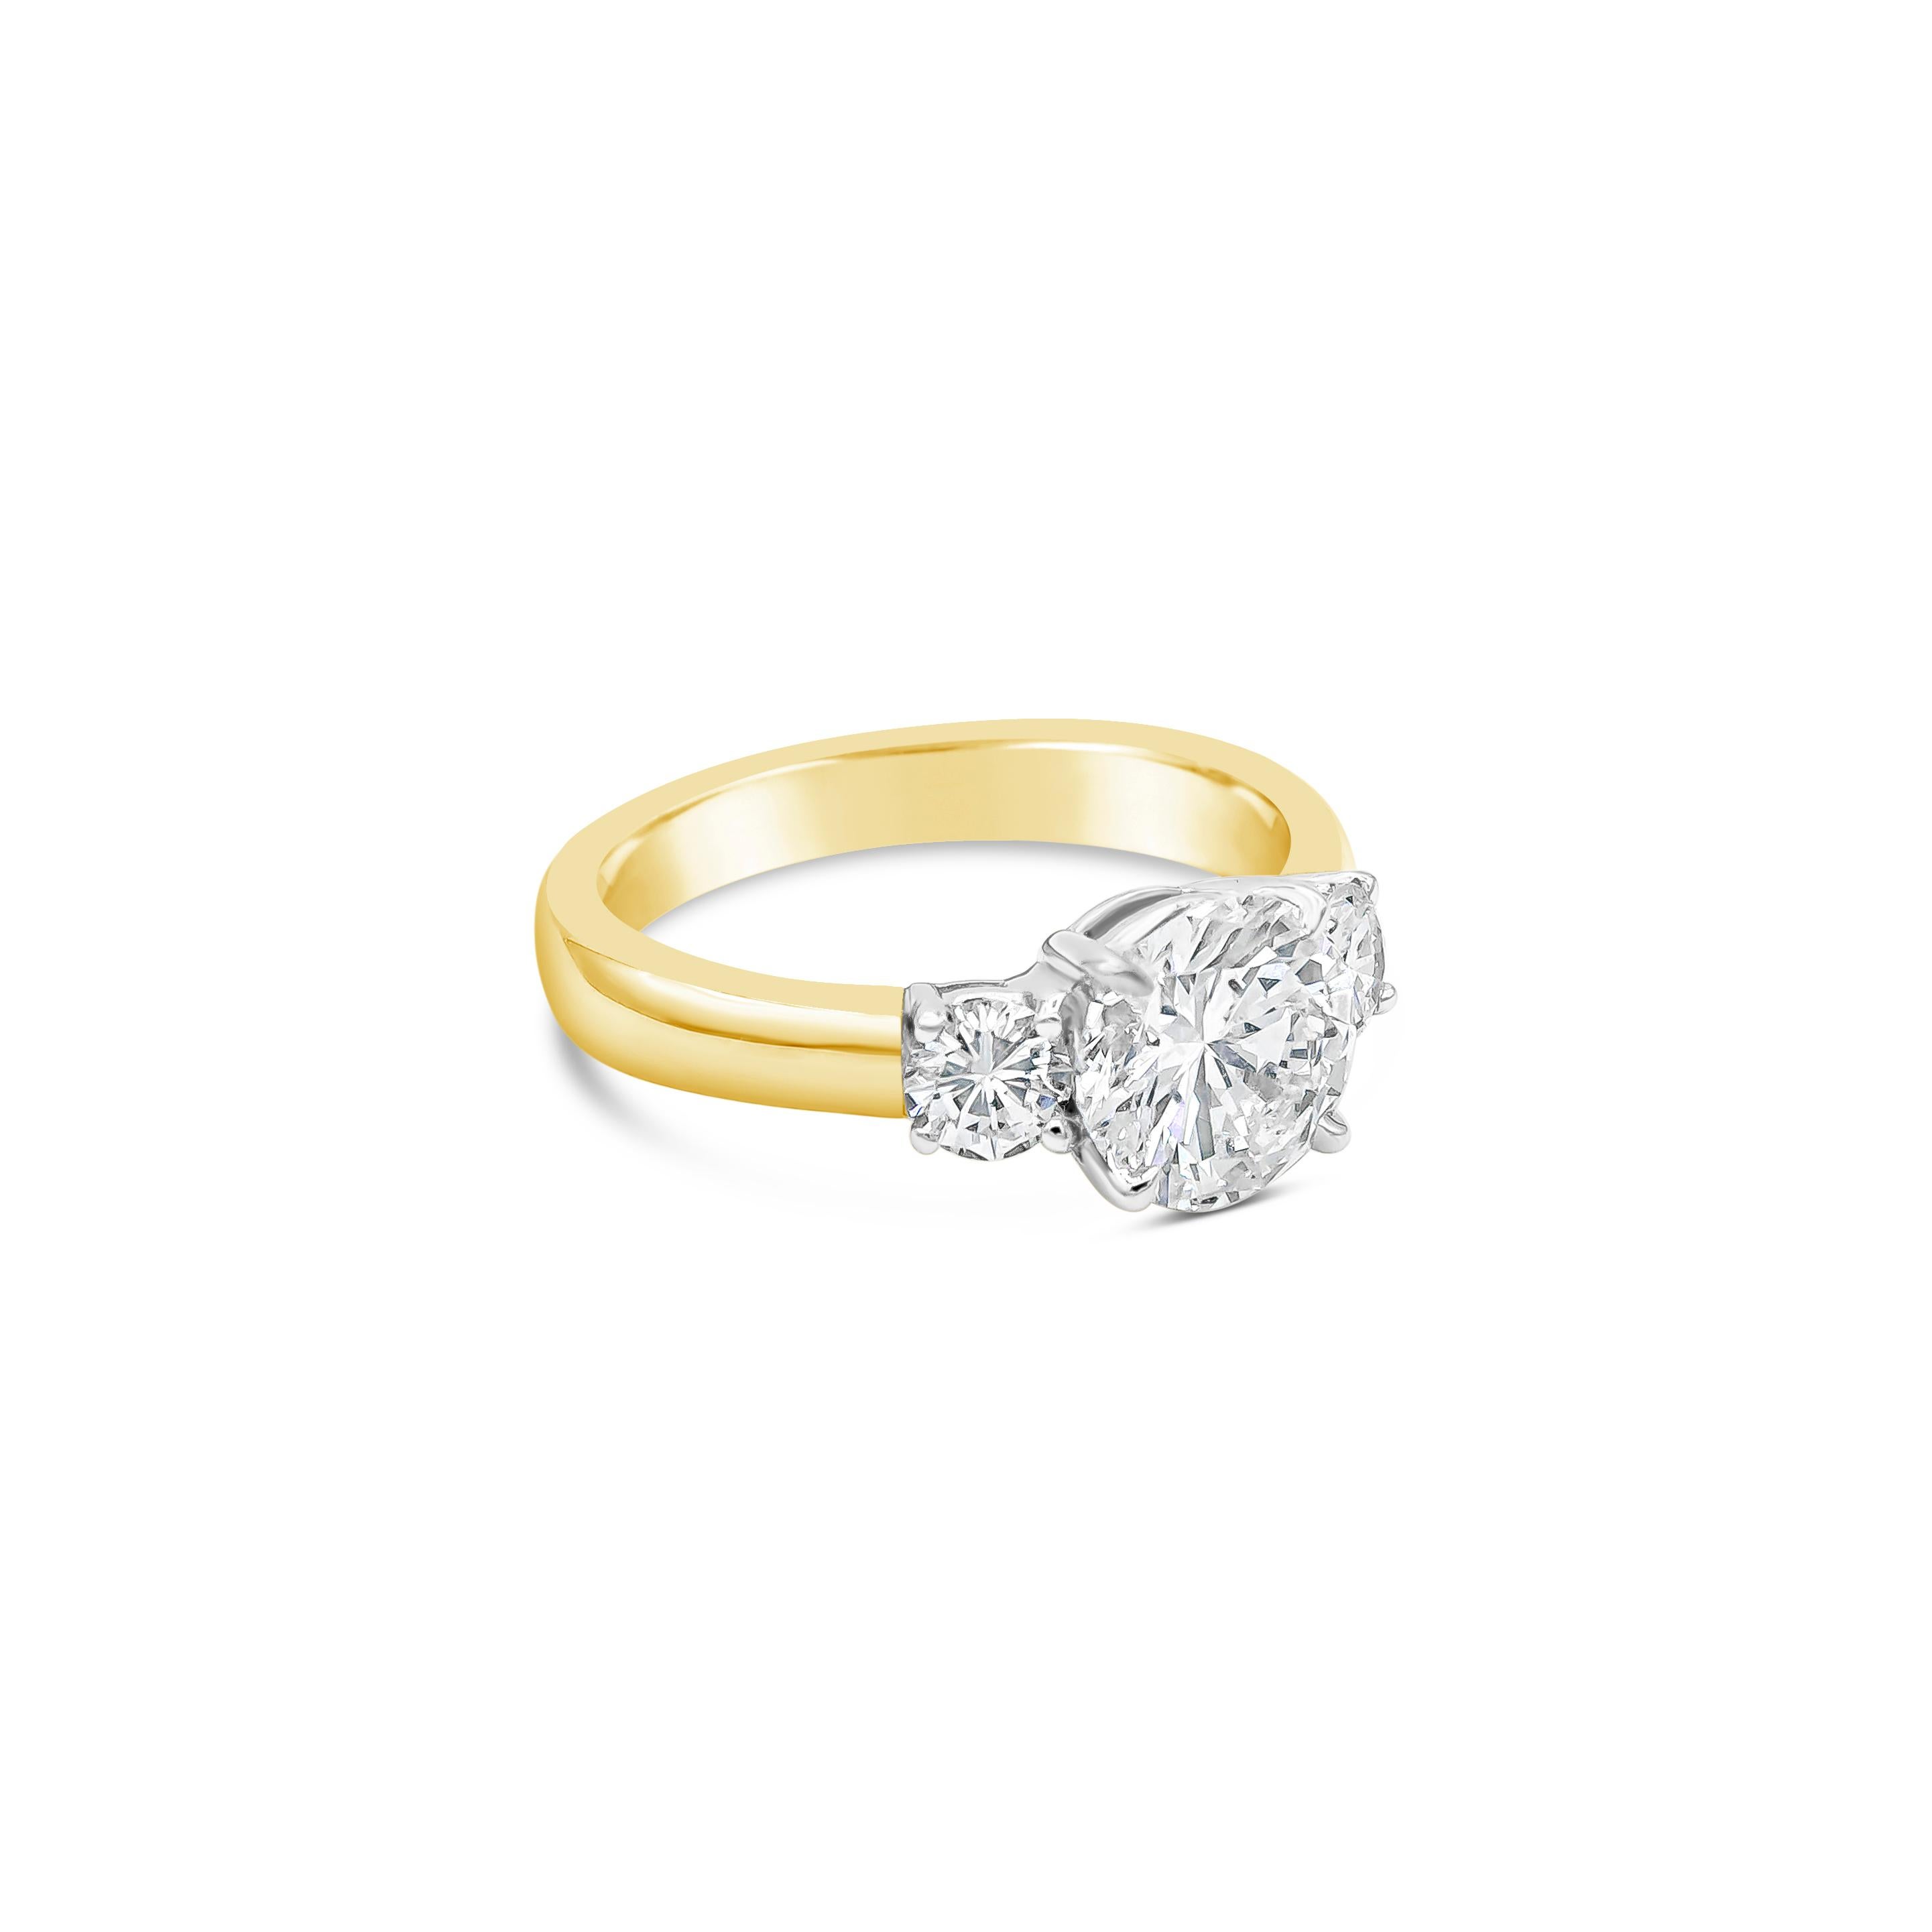 This ring showcases a round brilliant center stone that weighs at 1.50 carats, G Color and SI2 in Clarity. Flanked by a smaller brilliant round diamond on each side that weighs 0.40 carats total. Set in a 4 prong platinum crown attached to a comfort